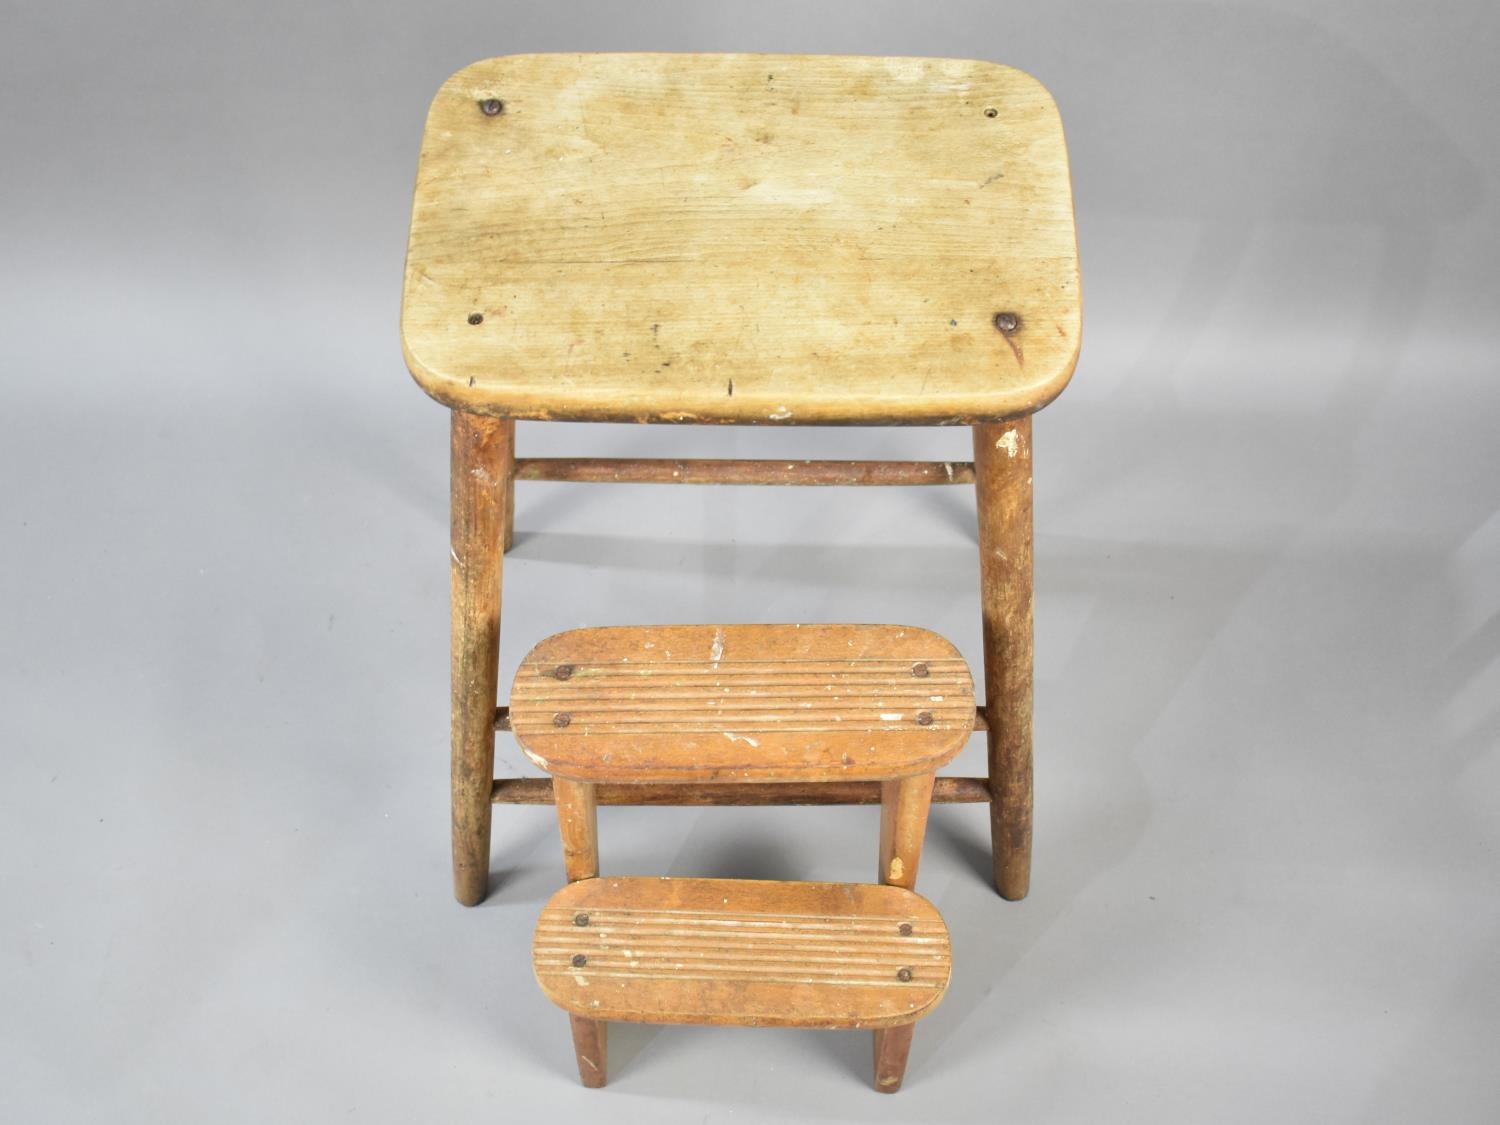 A Vintage Pine Step Stool, 63cms High - Image 2 of 2